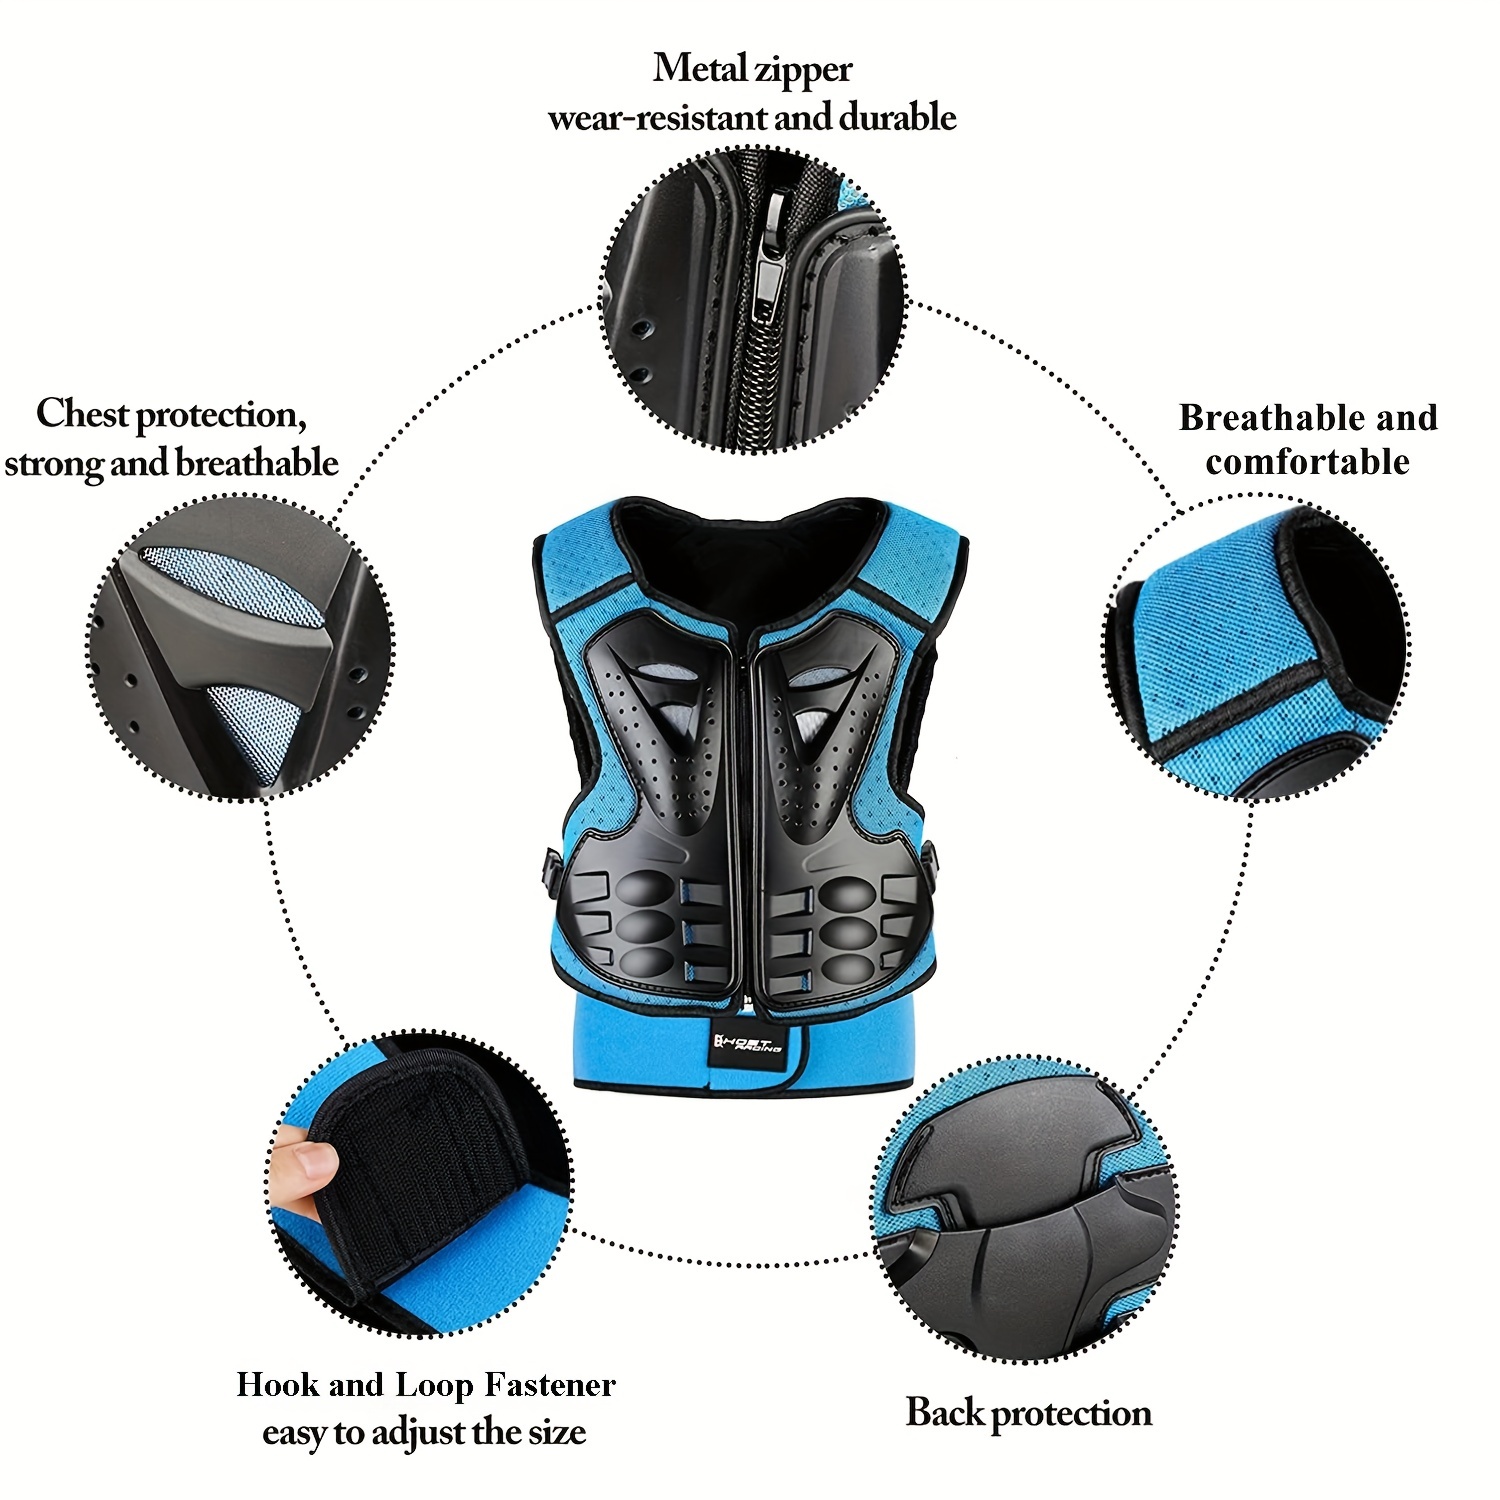 Kids Chest Protector, Dirt Bike Motorcycle Motocross Protective Armor, Youth Riding Biking Vest Jacket, Full Body Back Spine Armor Gear Guard